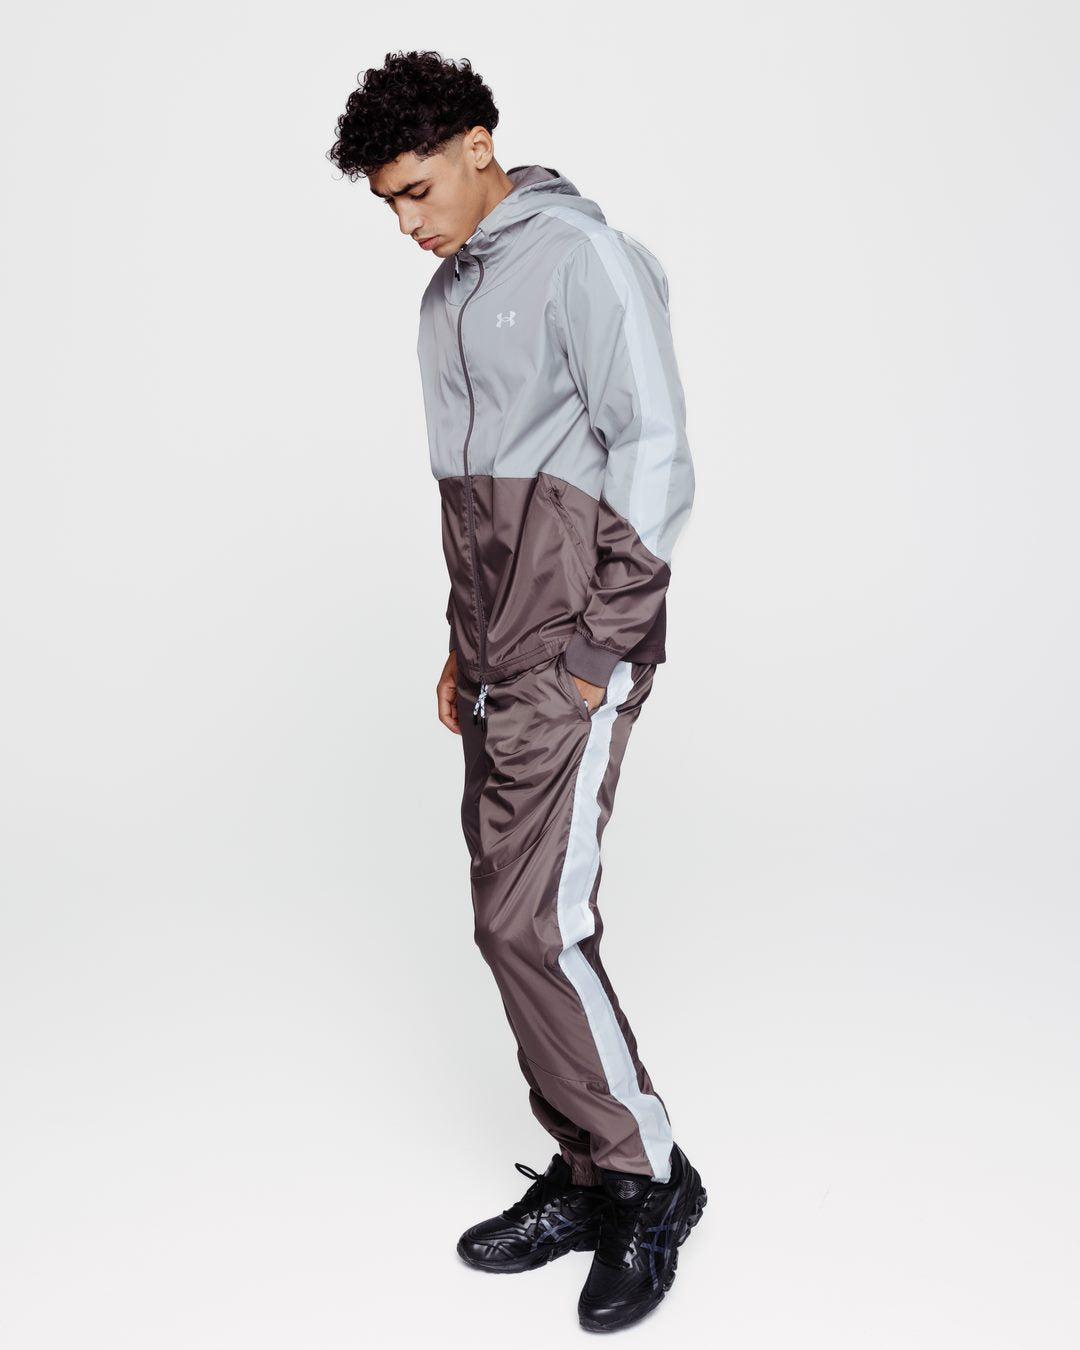 Under Armor Legacy Tracksuit - Brown/Grey